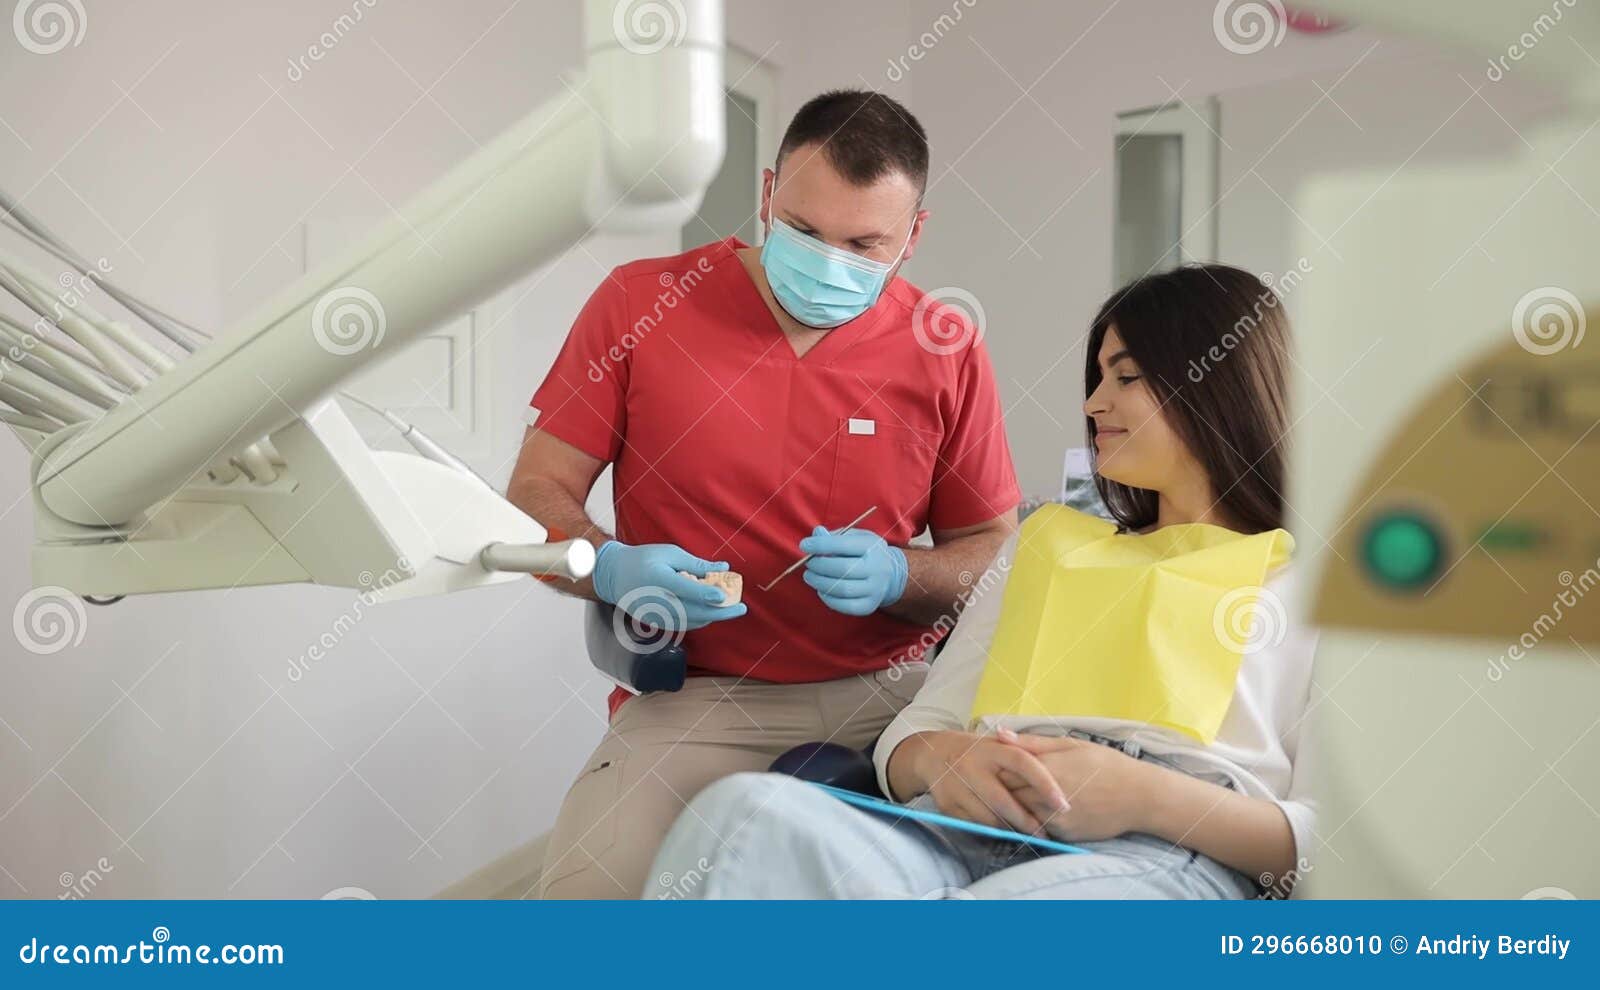 a dentist shows an orthodontic plastic jaw bite to a patient. health treatment of enamel.